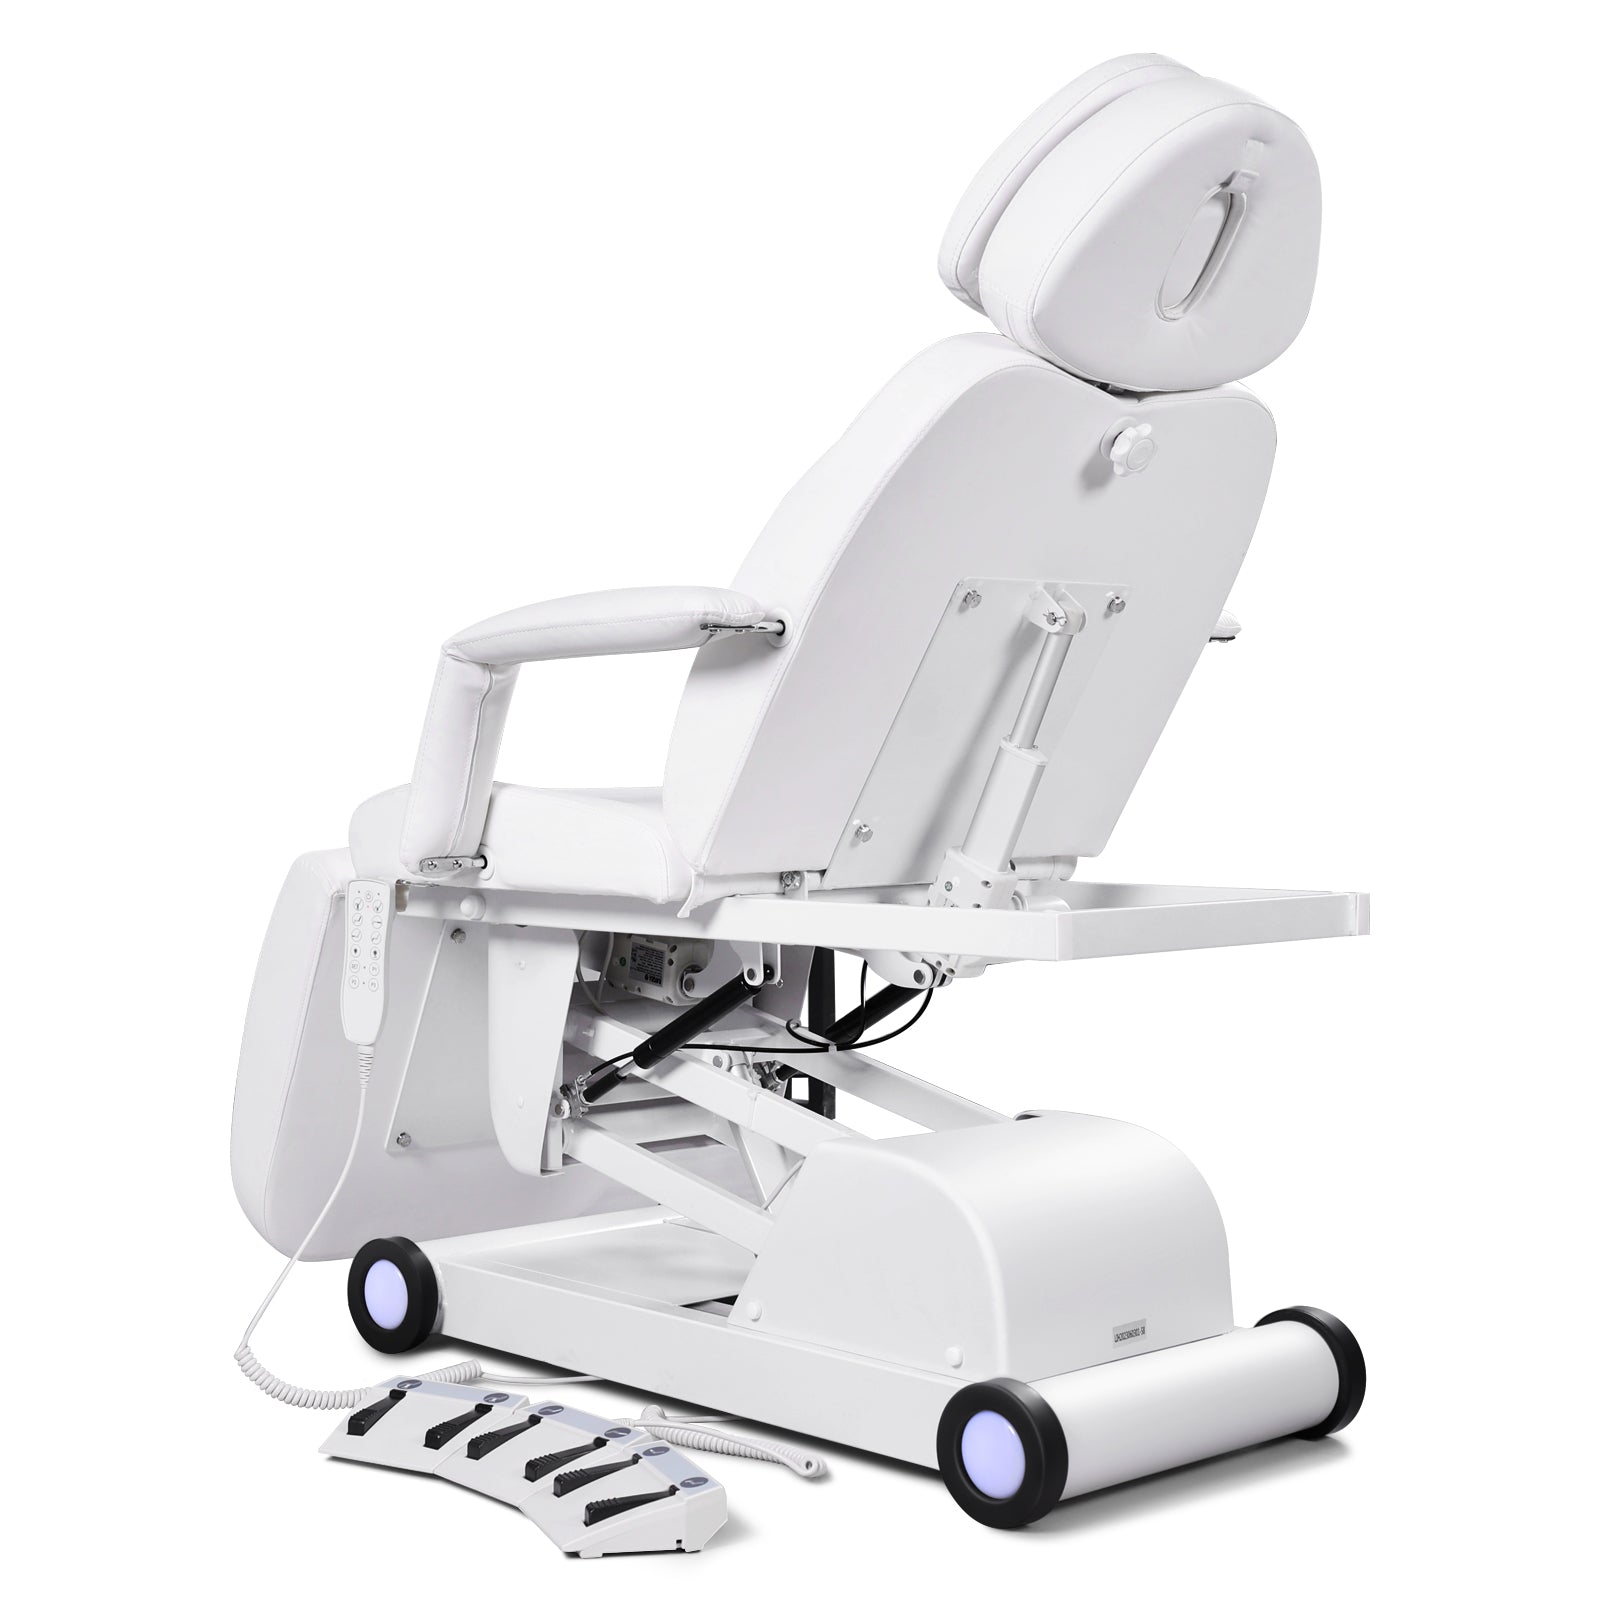 #2909 Electrical Facial Bed for Esthetician 3 Motor Removable Massage Table Led Light Beauty Bed Medical Aesthetic Tattoo Chair with Adjustments, Hand/Foot-Operated